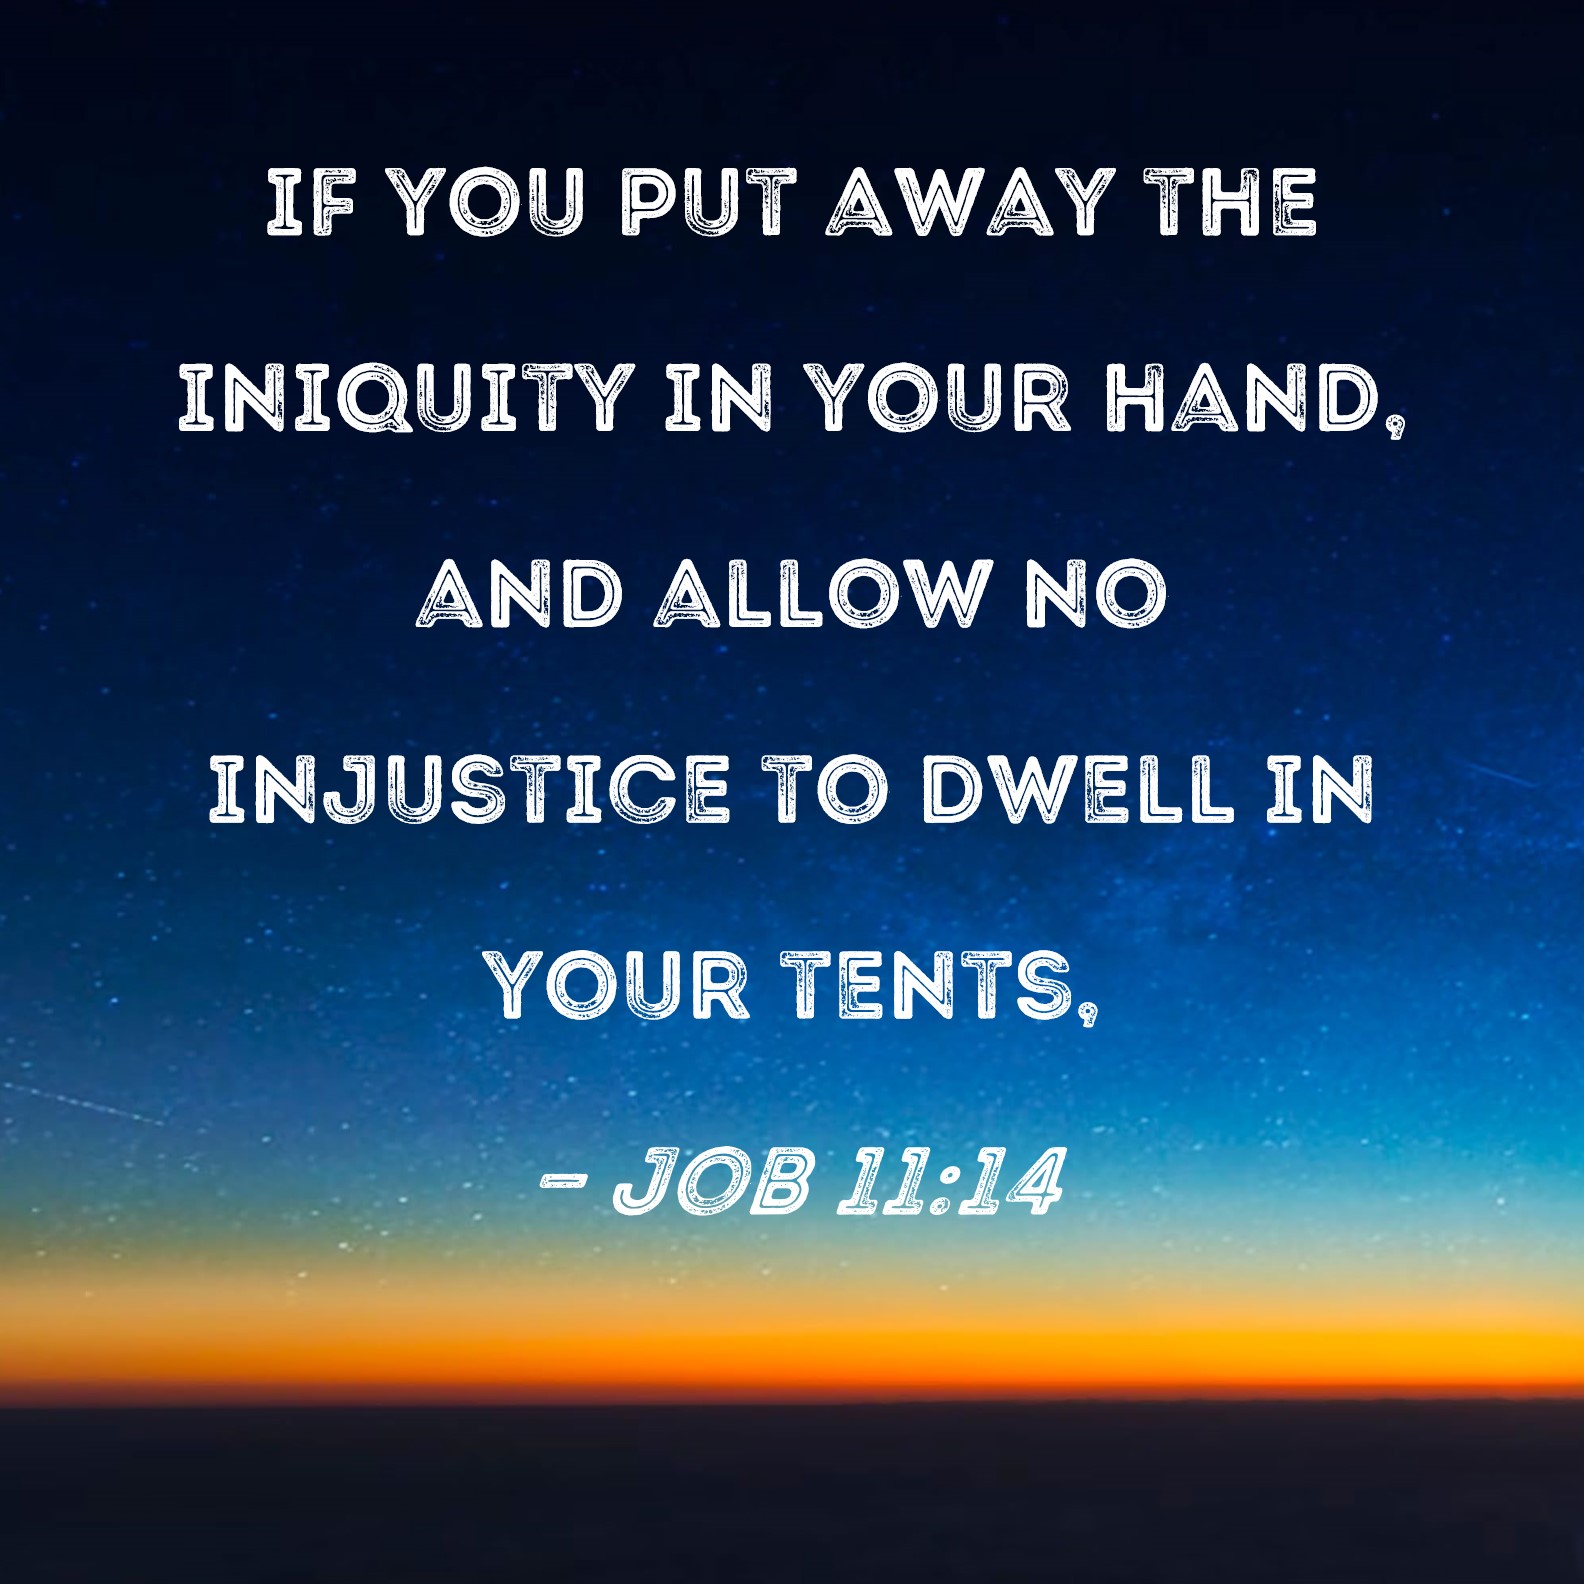 Job 11:14 if you put away the iniquity in your hand, and allow no